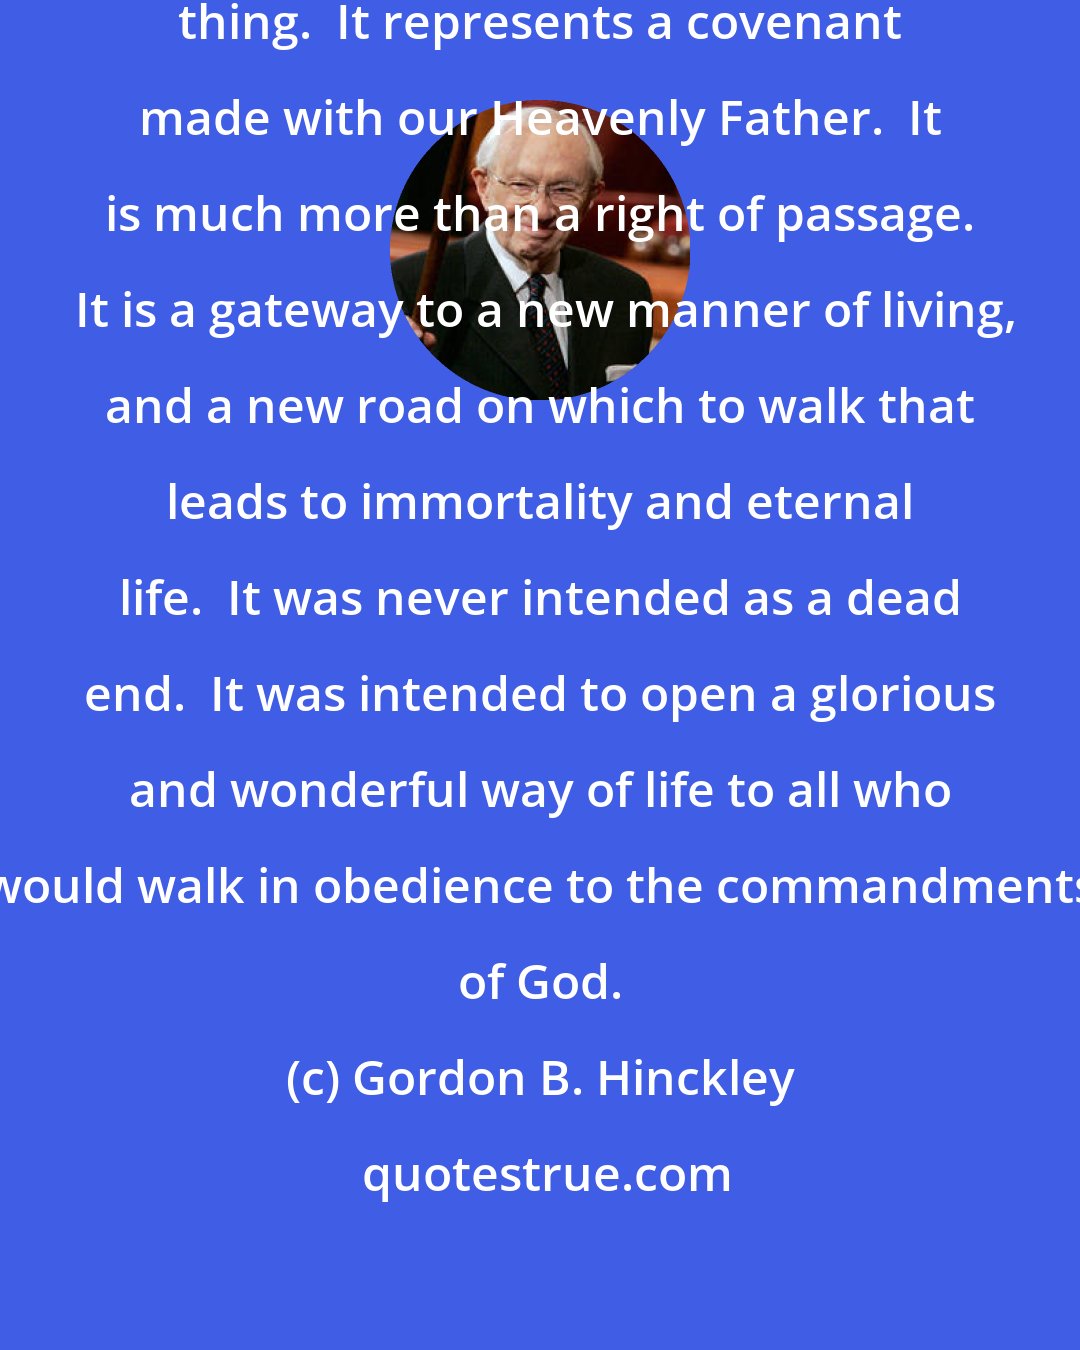 Gordon B. Hinckley: Baptism into this Church is a serious thing.  It represents a covenant made with our Heavenly Father.  It is much more than a right of passage.  It is a gateway to a new manner of living, and a new road on which to walk that leads to immortality and eternal life.  It was never intended as a dead end.  It was intended to open a glorious and wonderful way of life to all who would walk in obedience to the commandments of God.